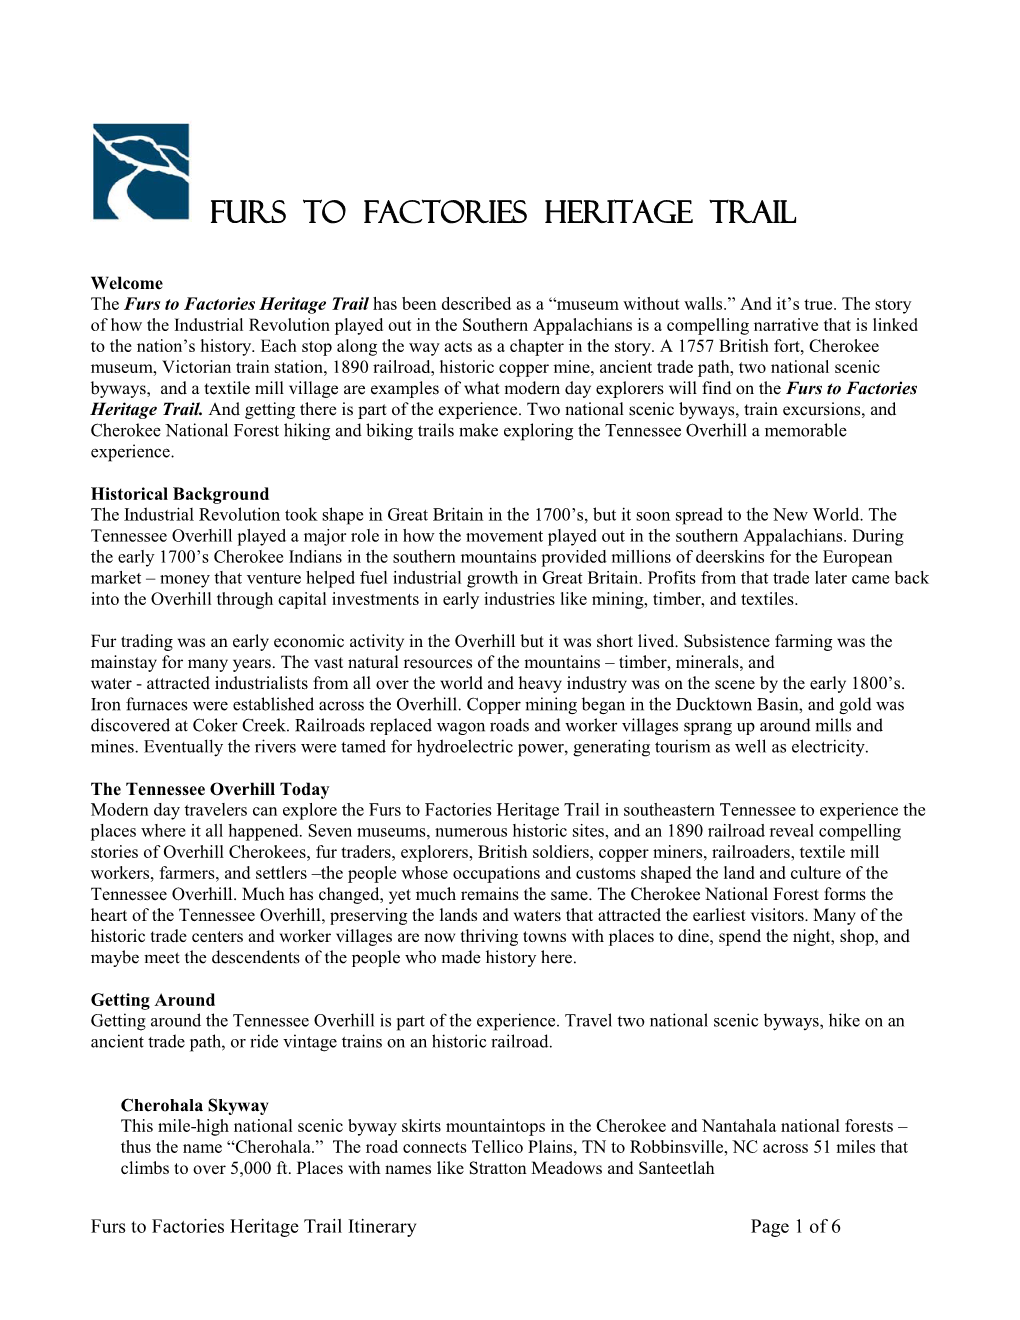 Furs to Factories Heritage Trail